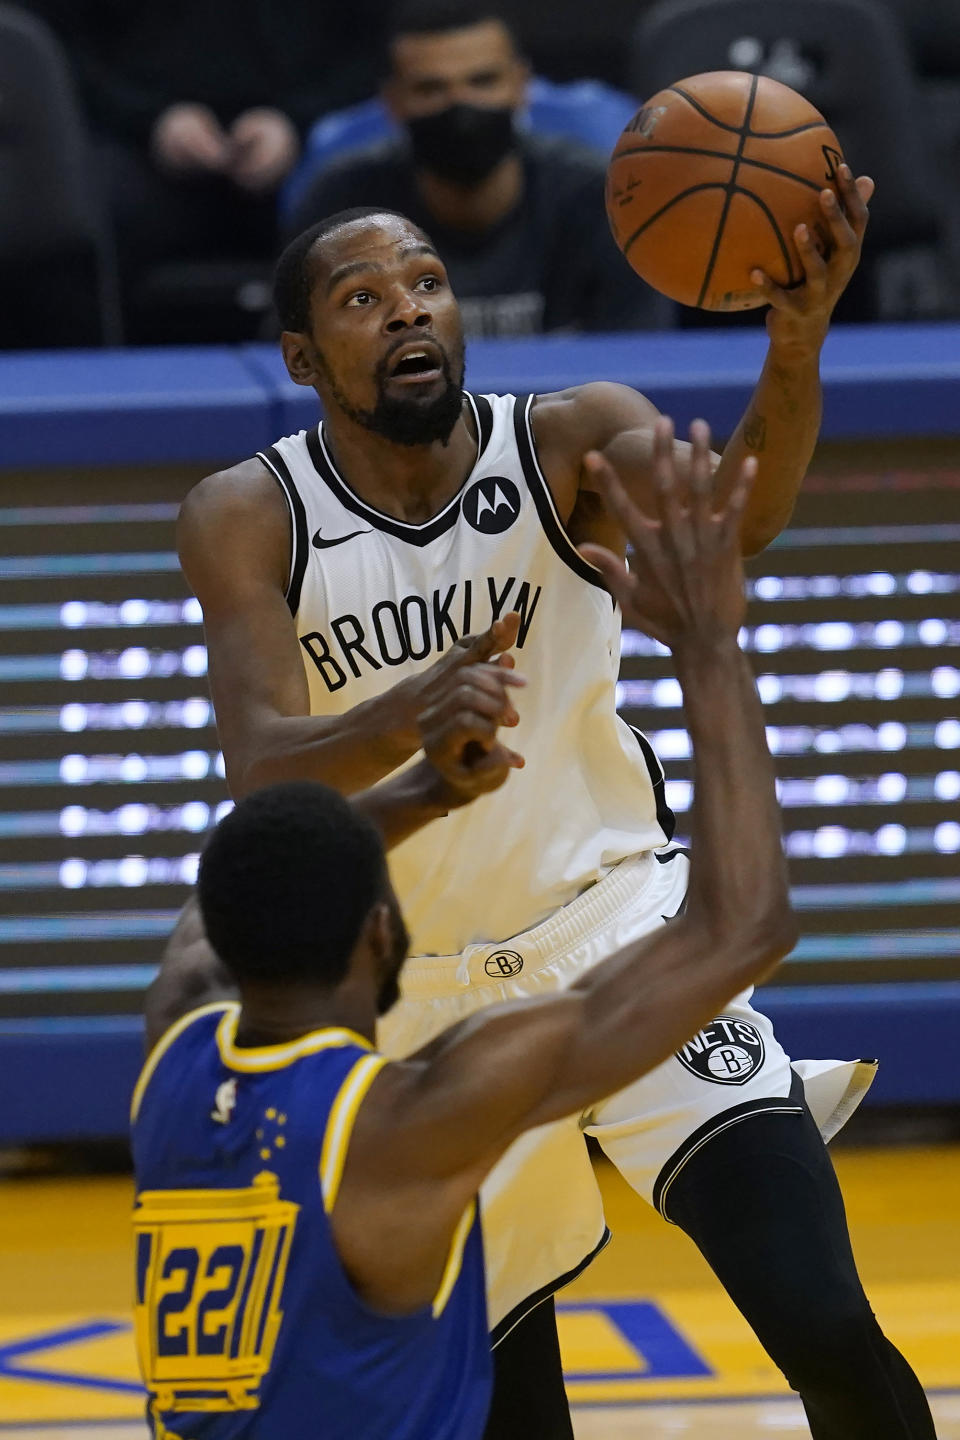 Brooklyn Nets forward Kevin Durant, top, shoots asGolden State Warriors forward Andrew Wiggins defends during the first half of an NBA basketball game in San Francisco, Saturday, Feb. 13, 2021. (AP Photo/Jeff Chiu)